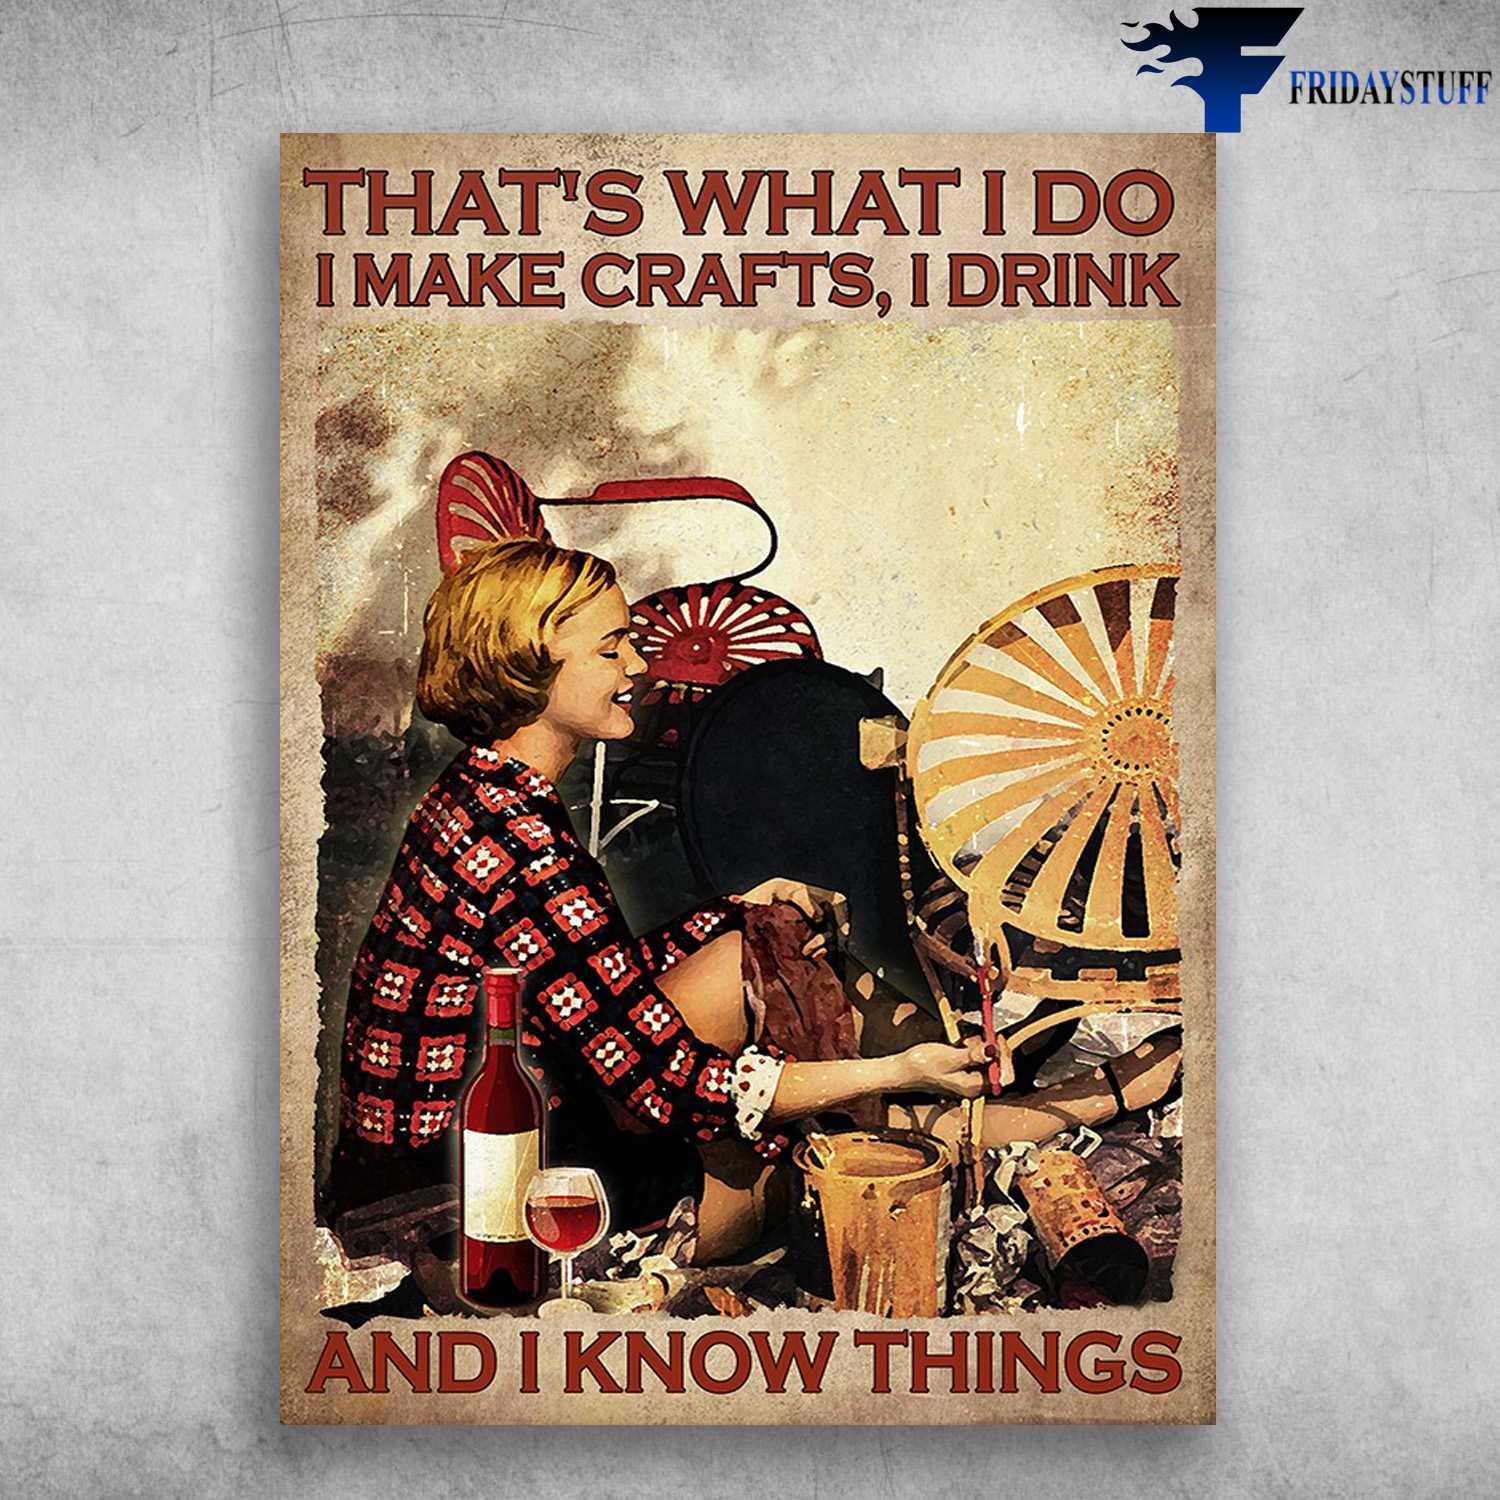 Make Crafts And Wine - That's What I Do, I Make Crafts, I Drink, And I Know Things